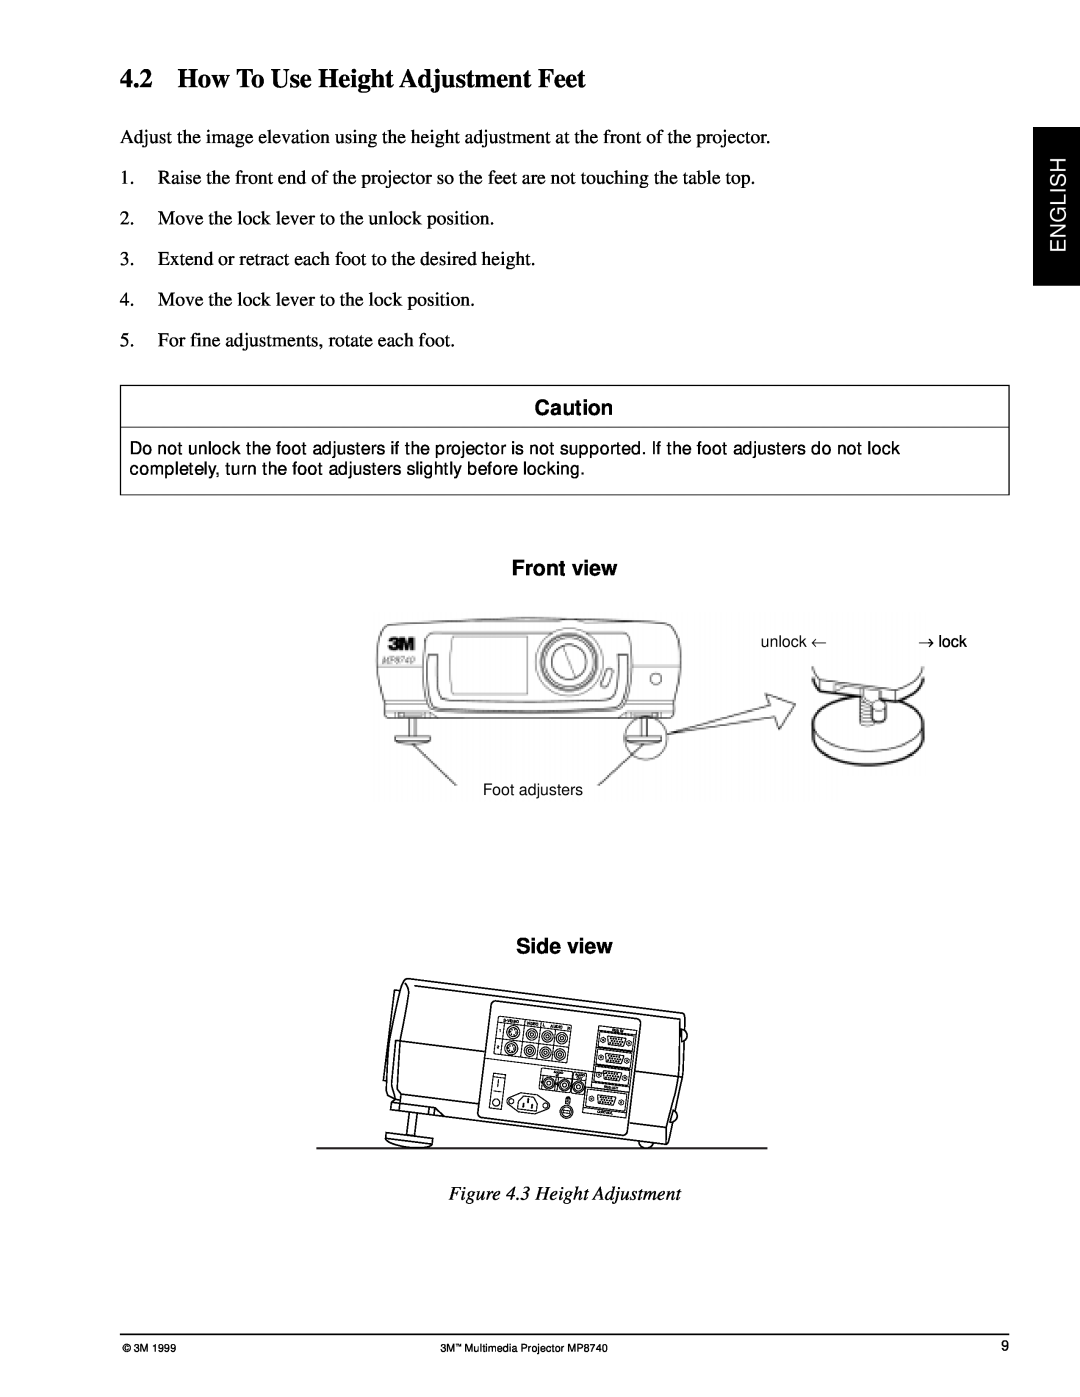 3M MP8740 manual How To Use Height Adjustment Feet, Front view, Side view, English, 3 Height Adjustment 